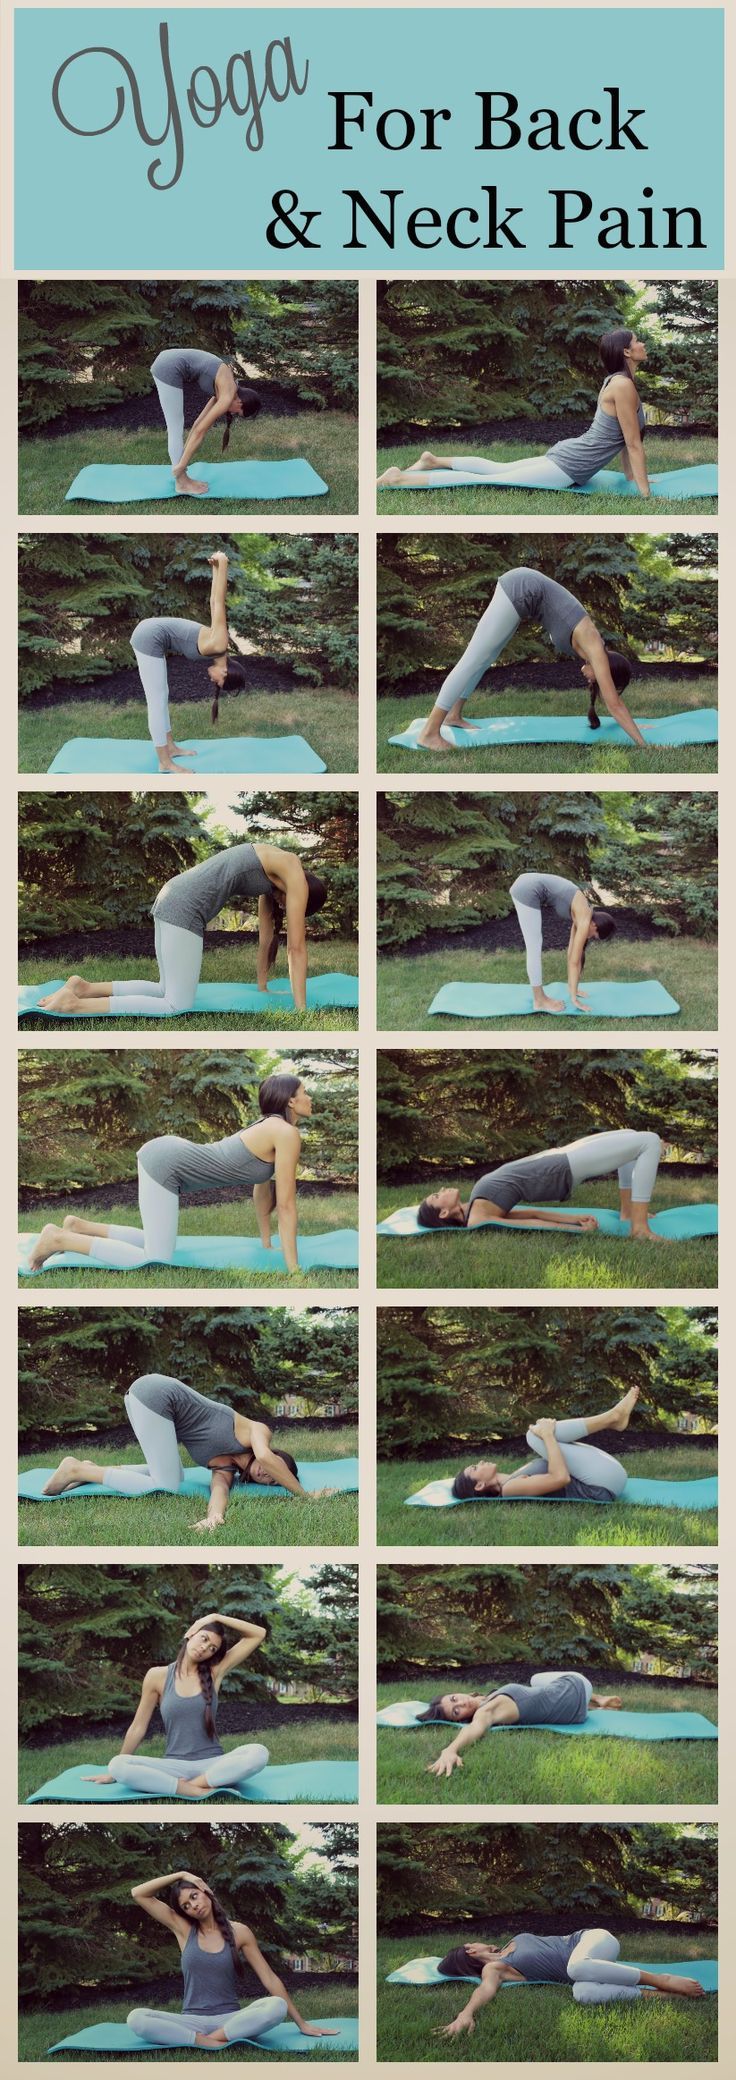 Repin to save these poses for later! Give these Yoga poses a try if you are expe...